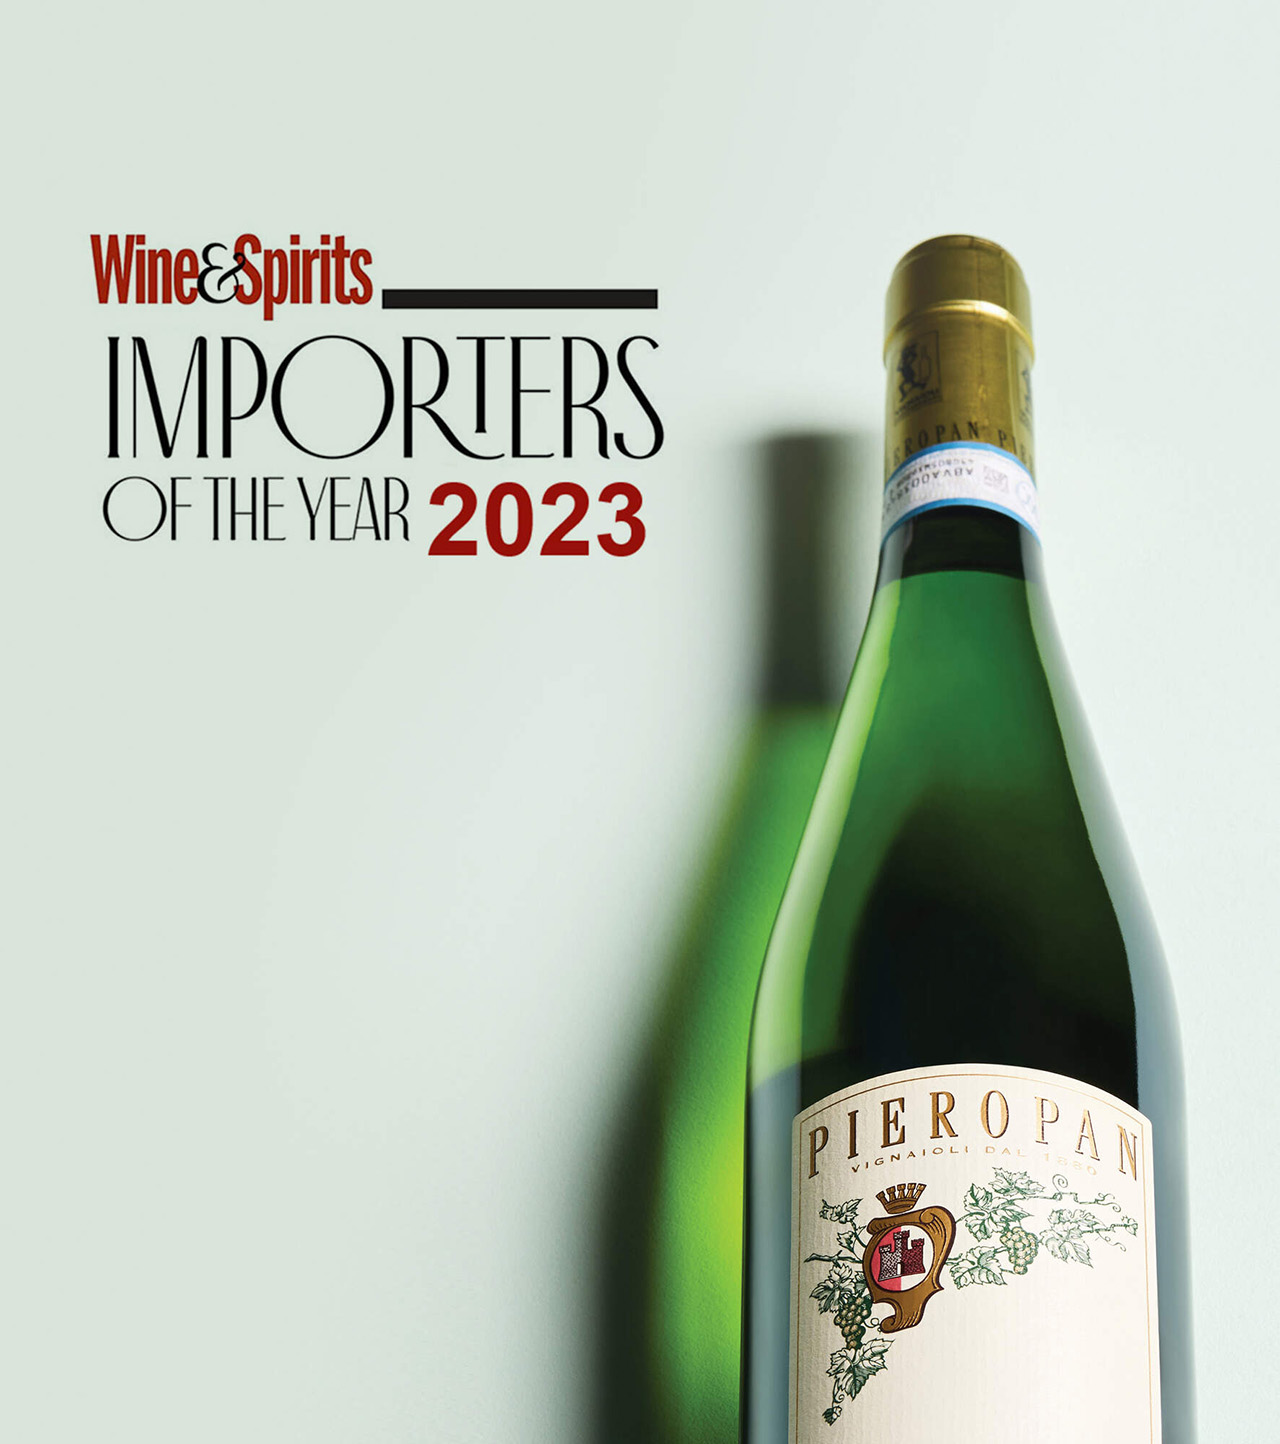 Wine & Spirits Importers of the year 2023 title next to a bottle of Pieropan wine